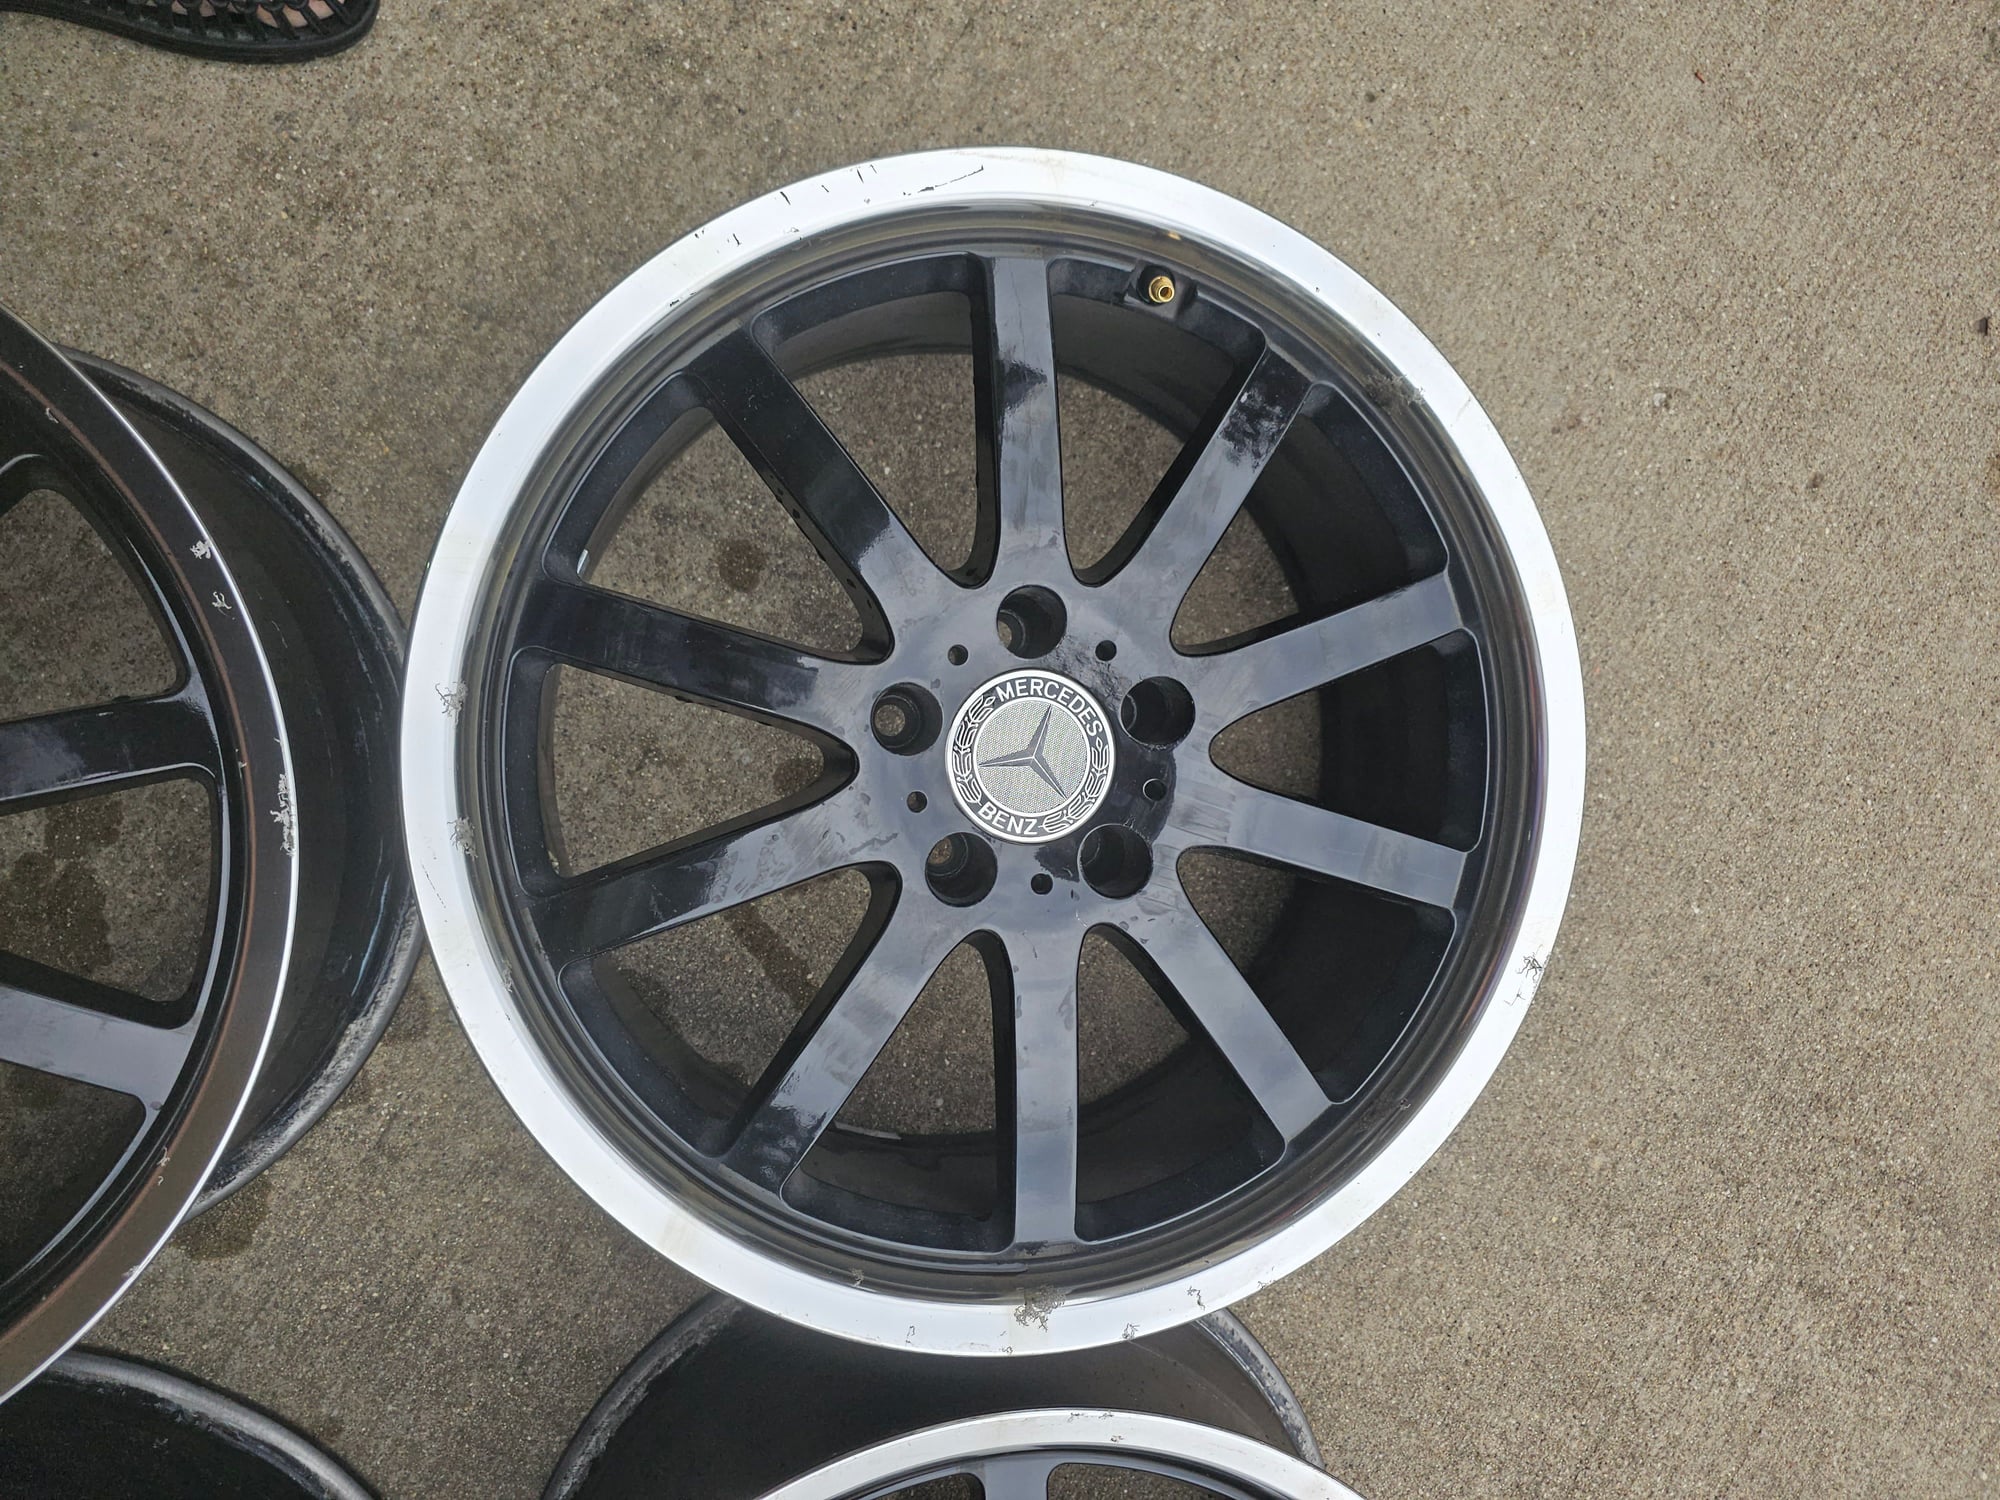 Wheels and Tires/Axles - Winter wheels for CLS or E class - Used - 2012 to 2020 Mercedes-Benz CLS550 - 2012 to 2020 Mercedes-Benz E-Class - Downers Grove, IL 60516, United States